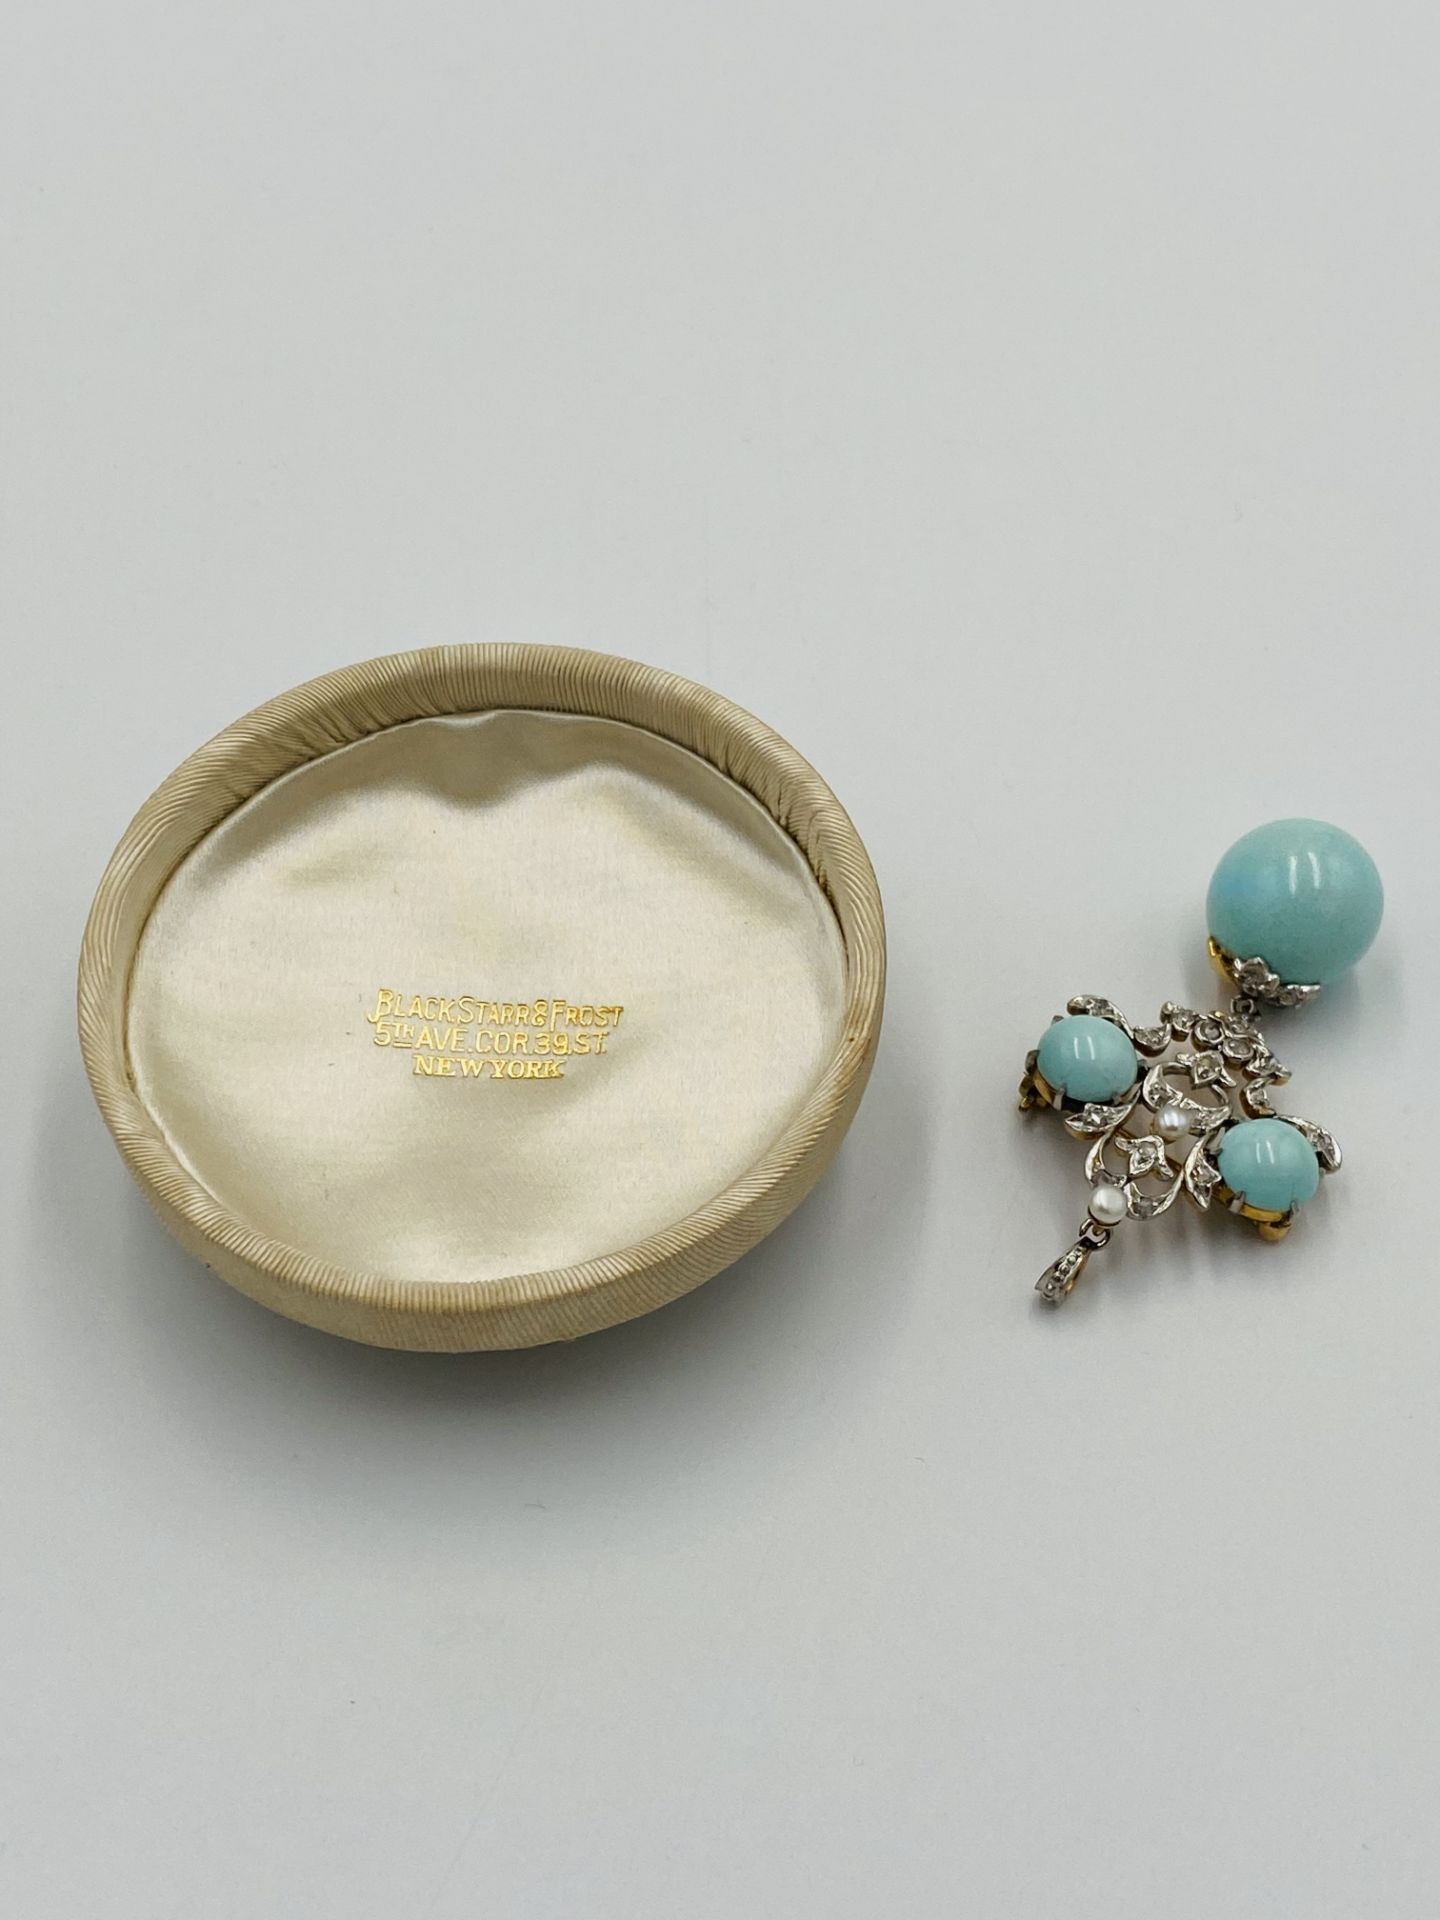 Turquoise and diamond brooch/pendant - Image 5 of 5